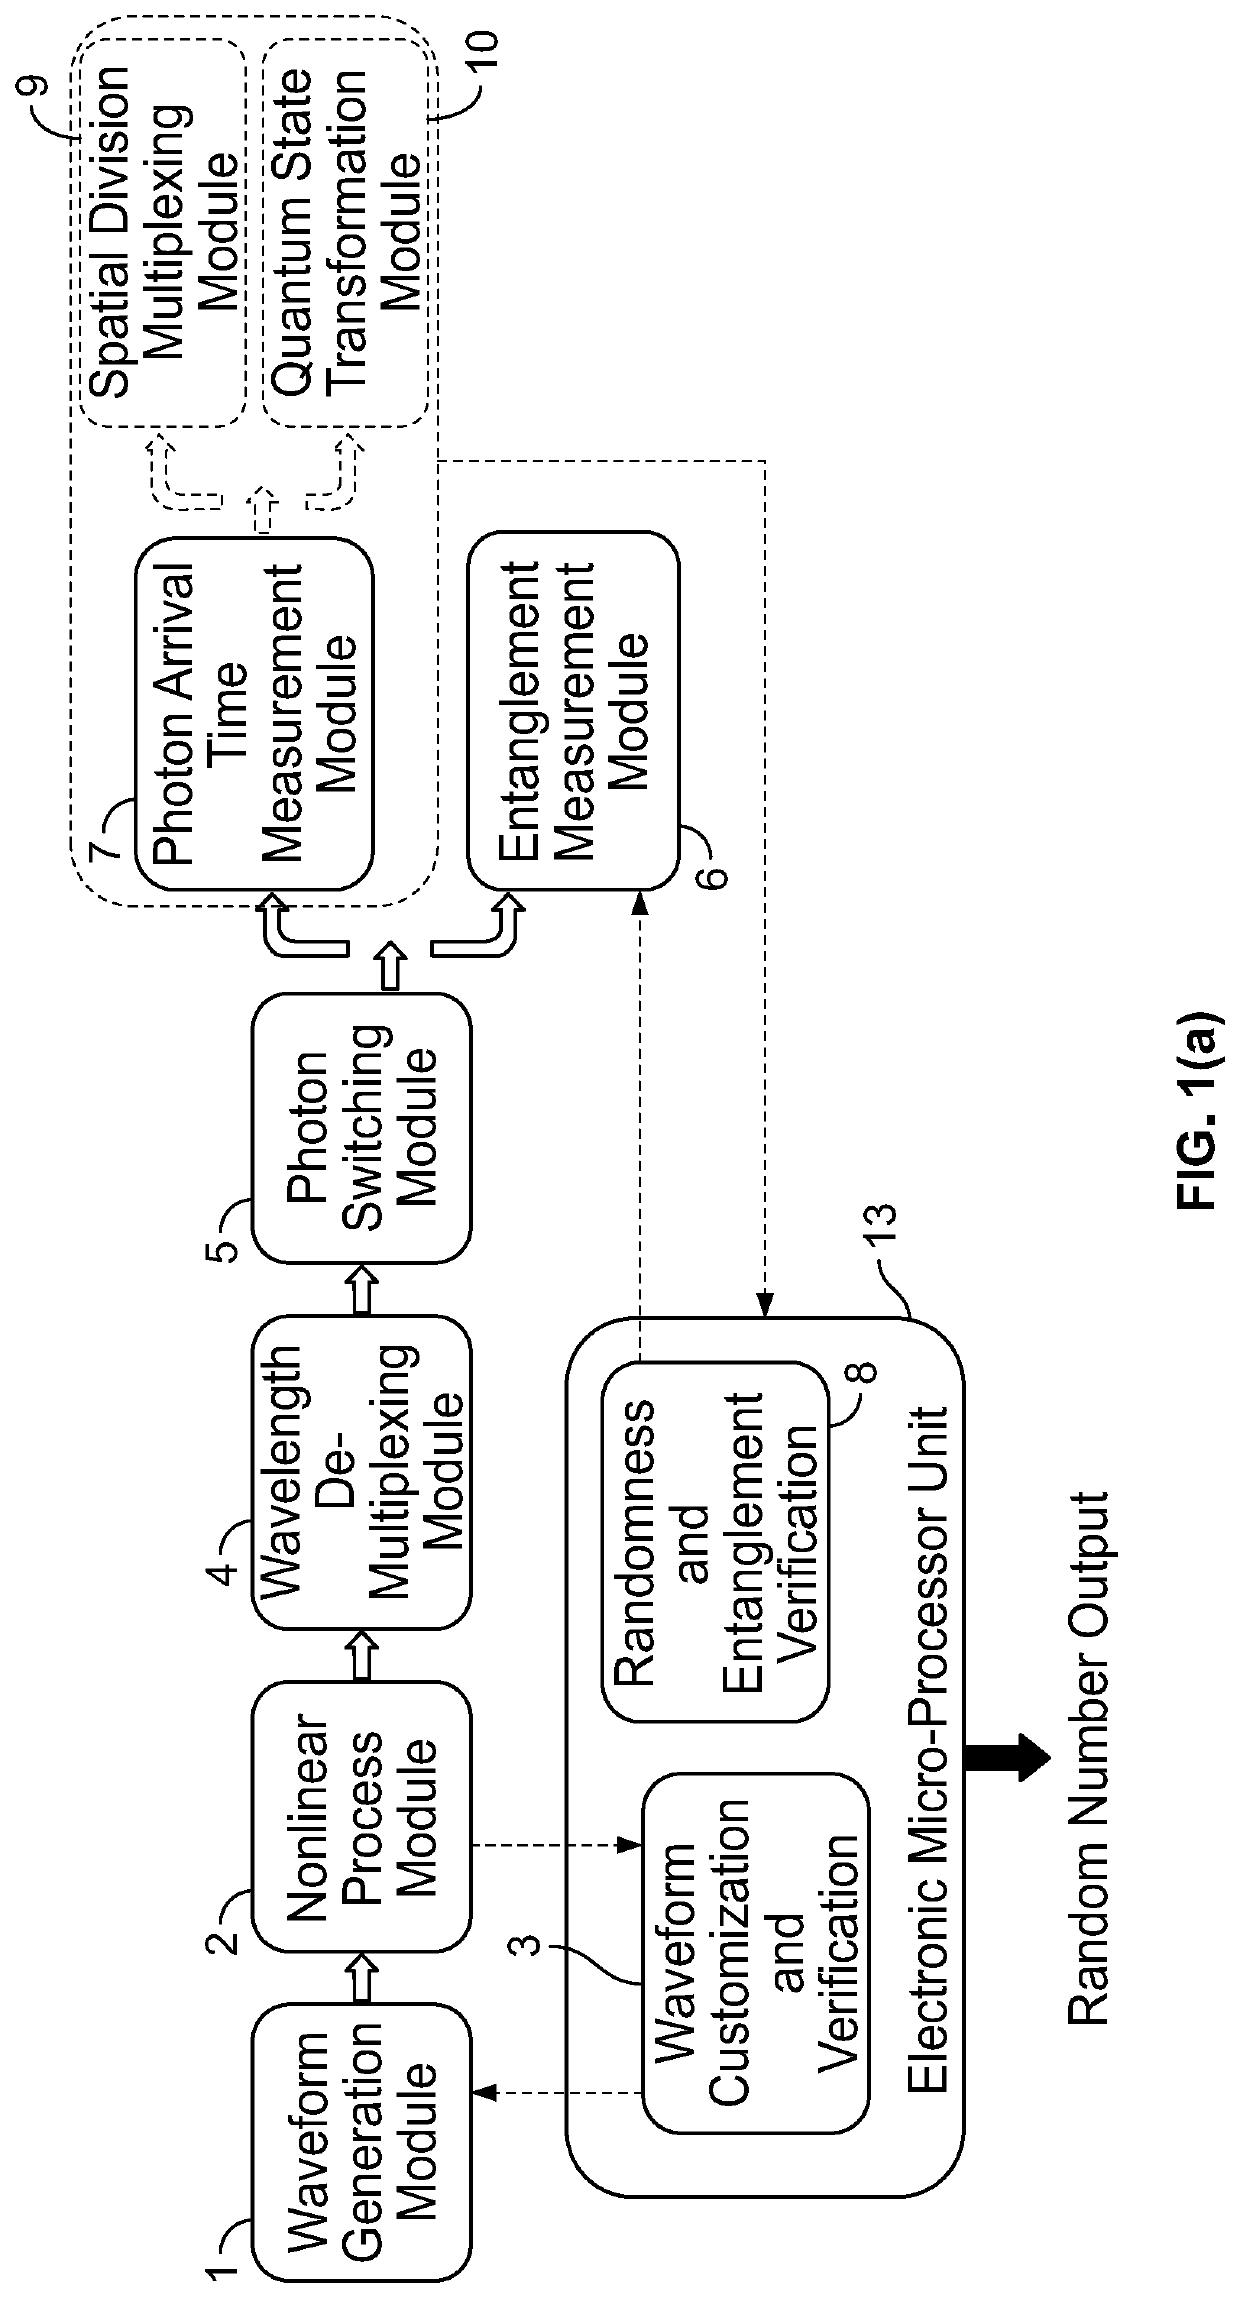 Chip-integrated device and methods for generating random numbers that is reconfigurable and provides genuineness verification